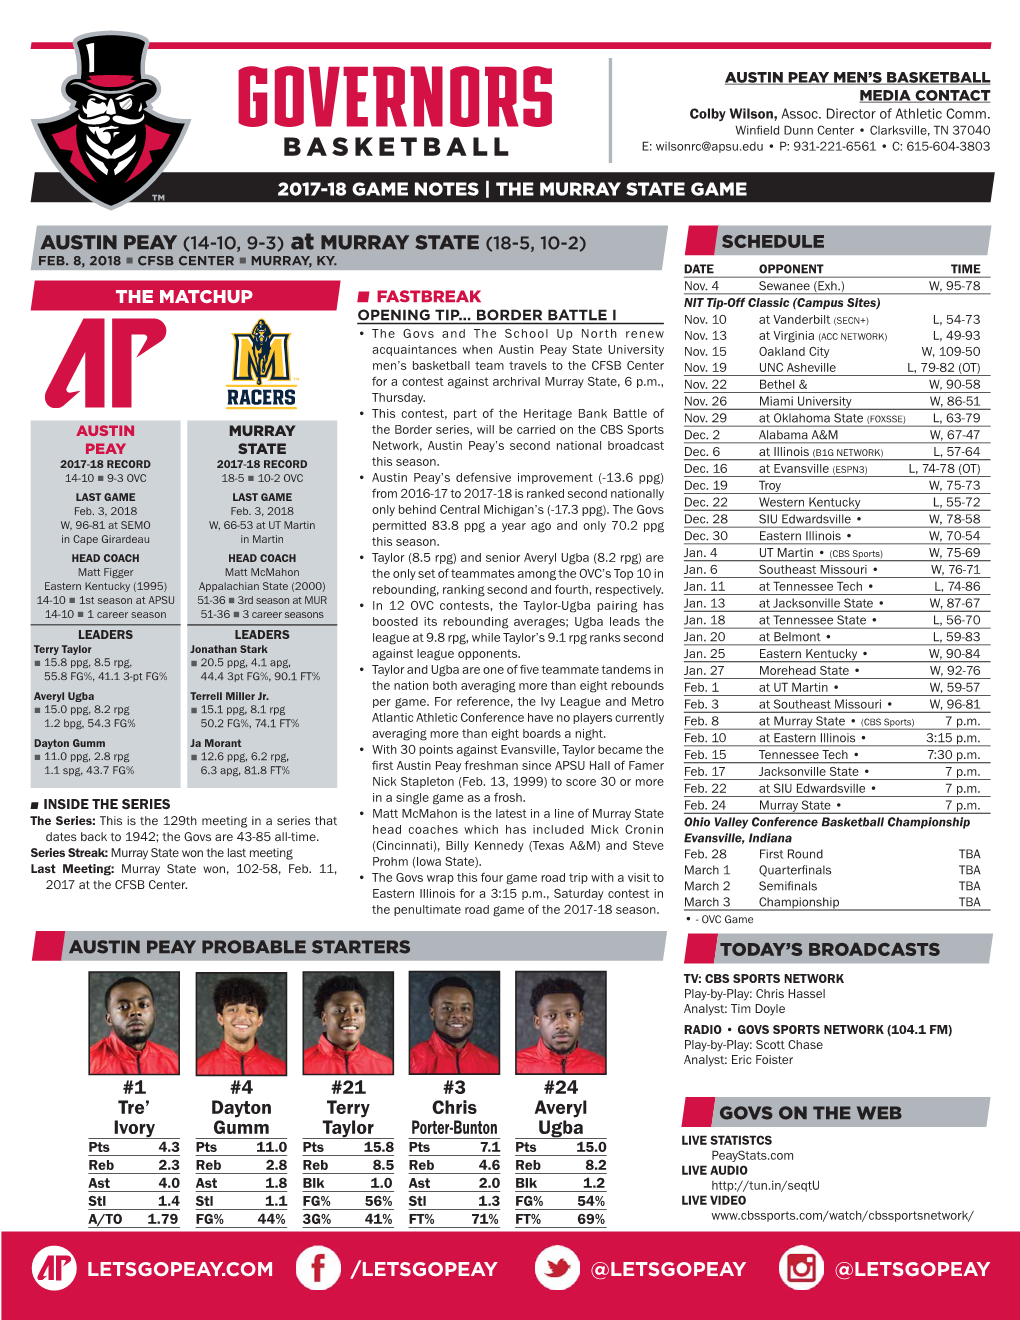 Letsgopeay.Com /Letsgopeay @Letsgopeay @Letsgopeay Noting the Game ■ What You Should Know Vs